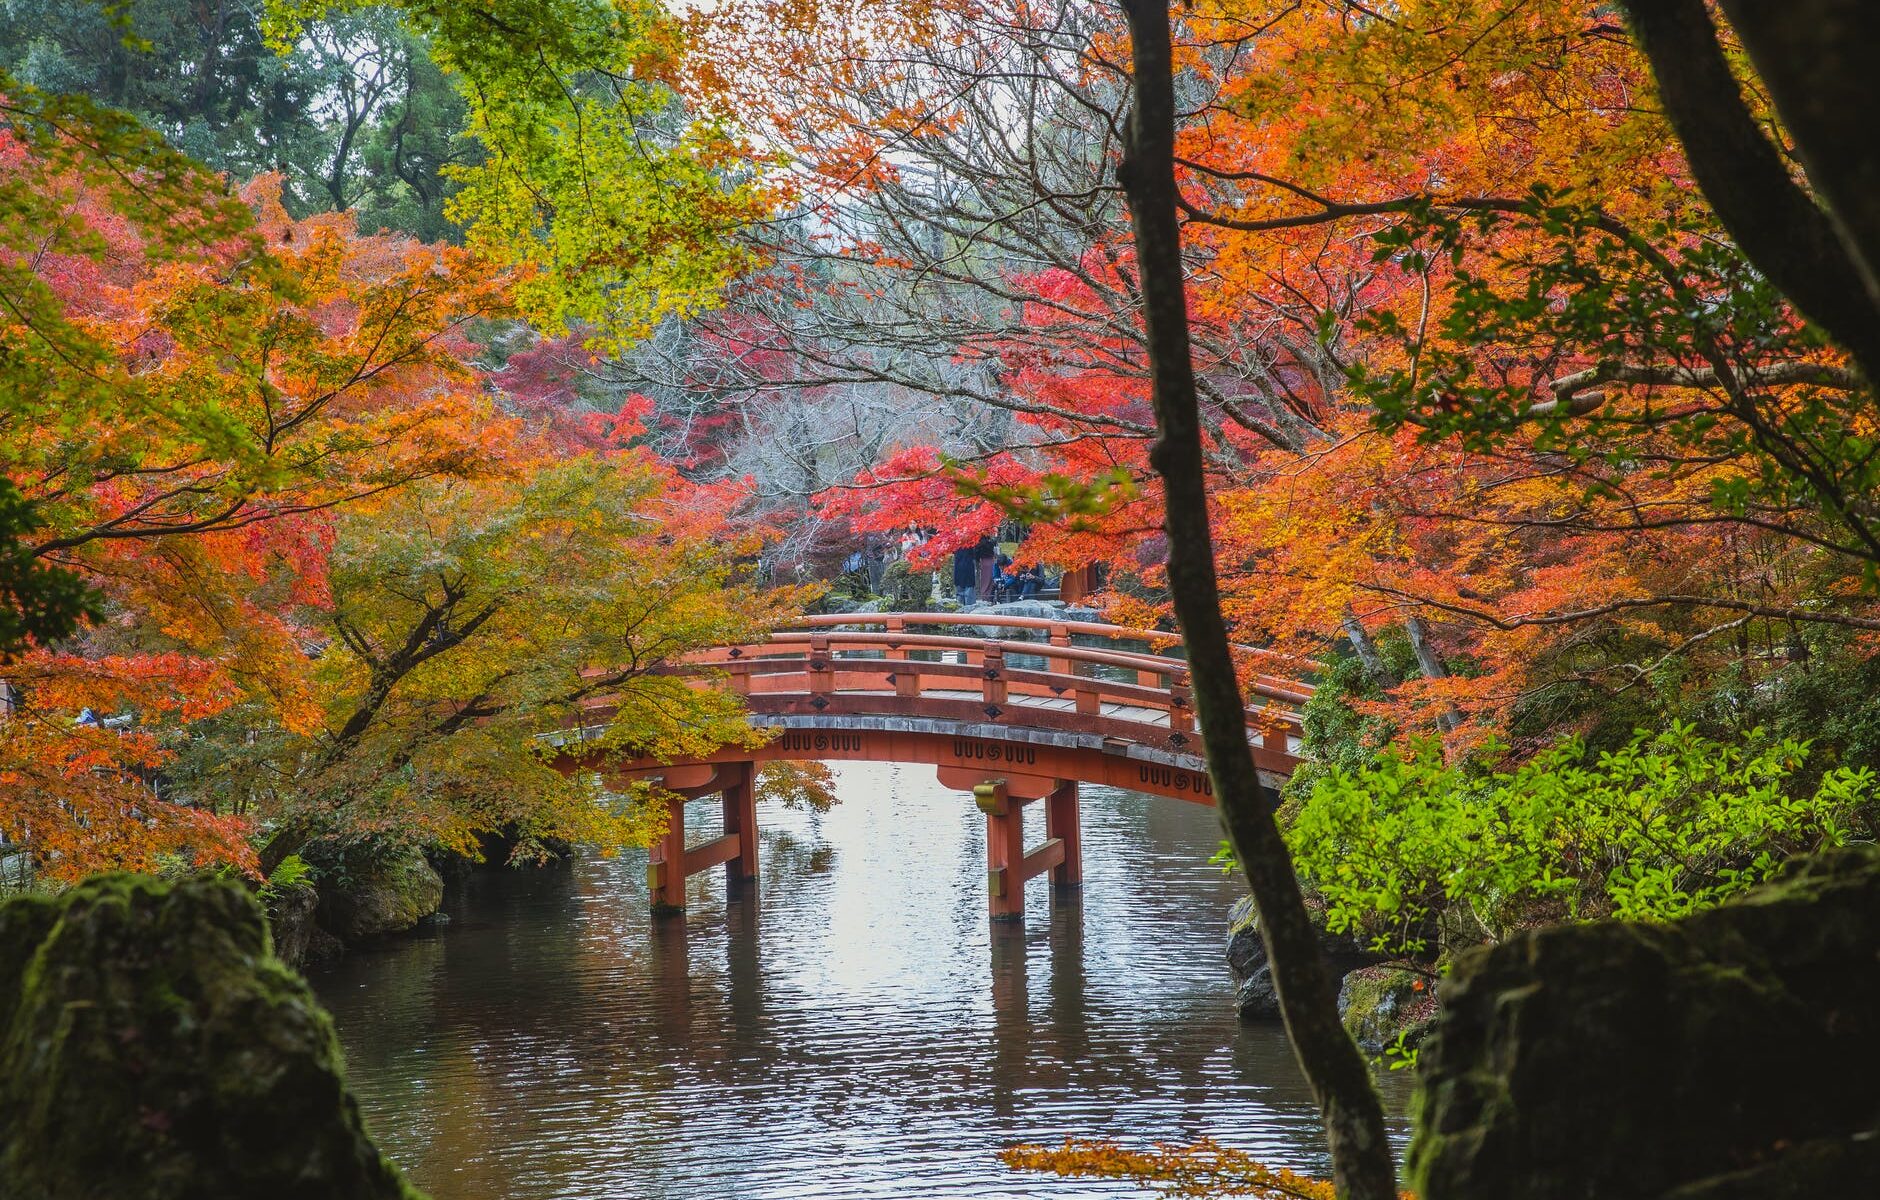 arched bridge over calm lake in japanese park